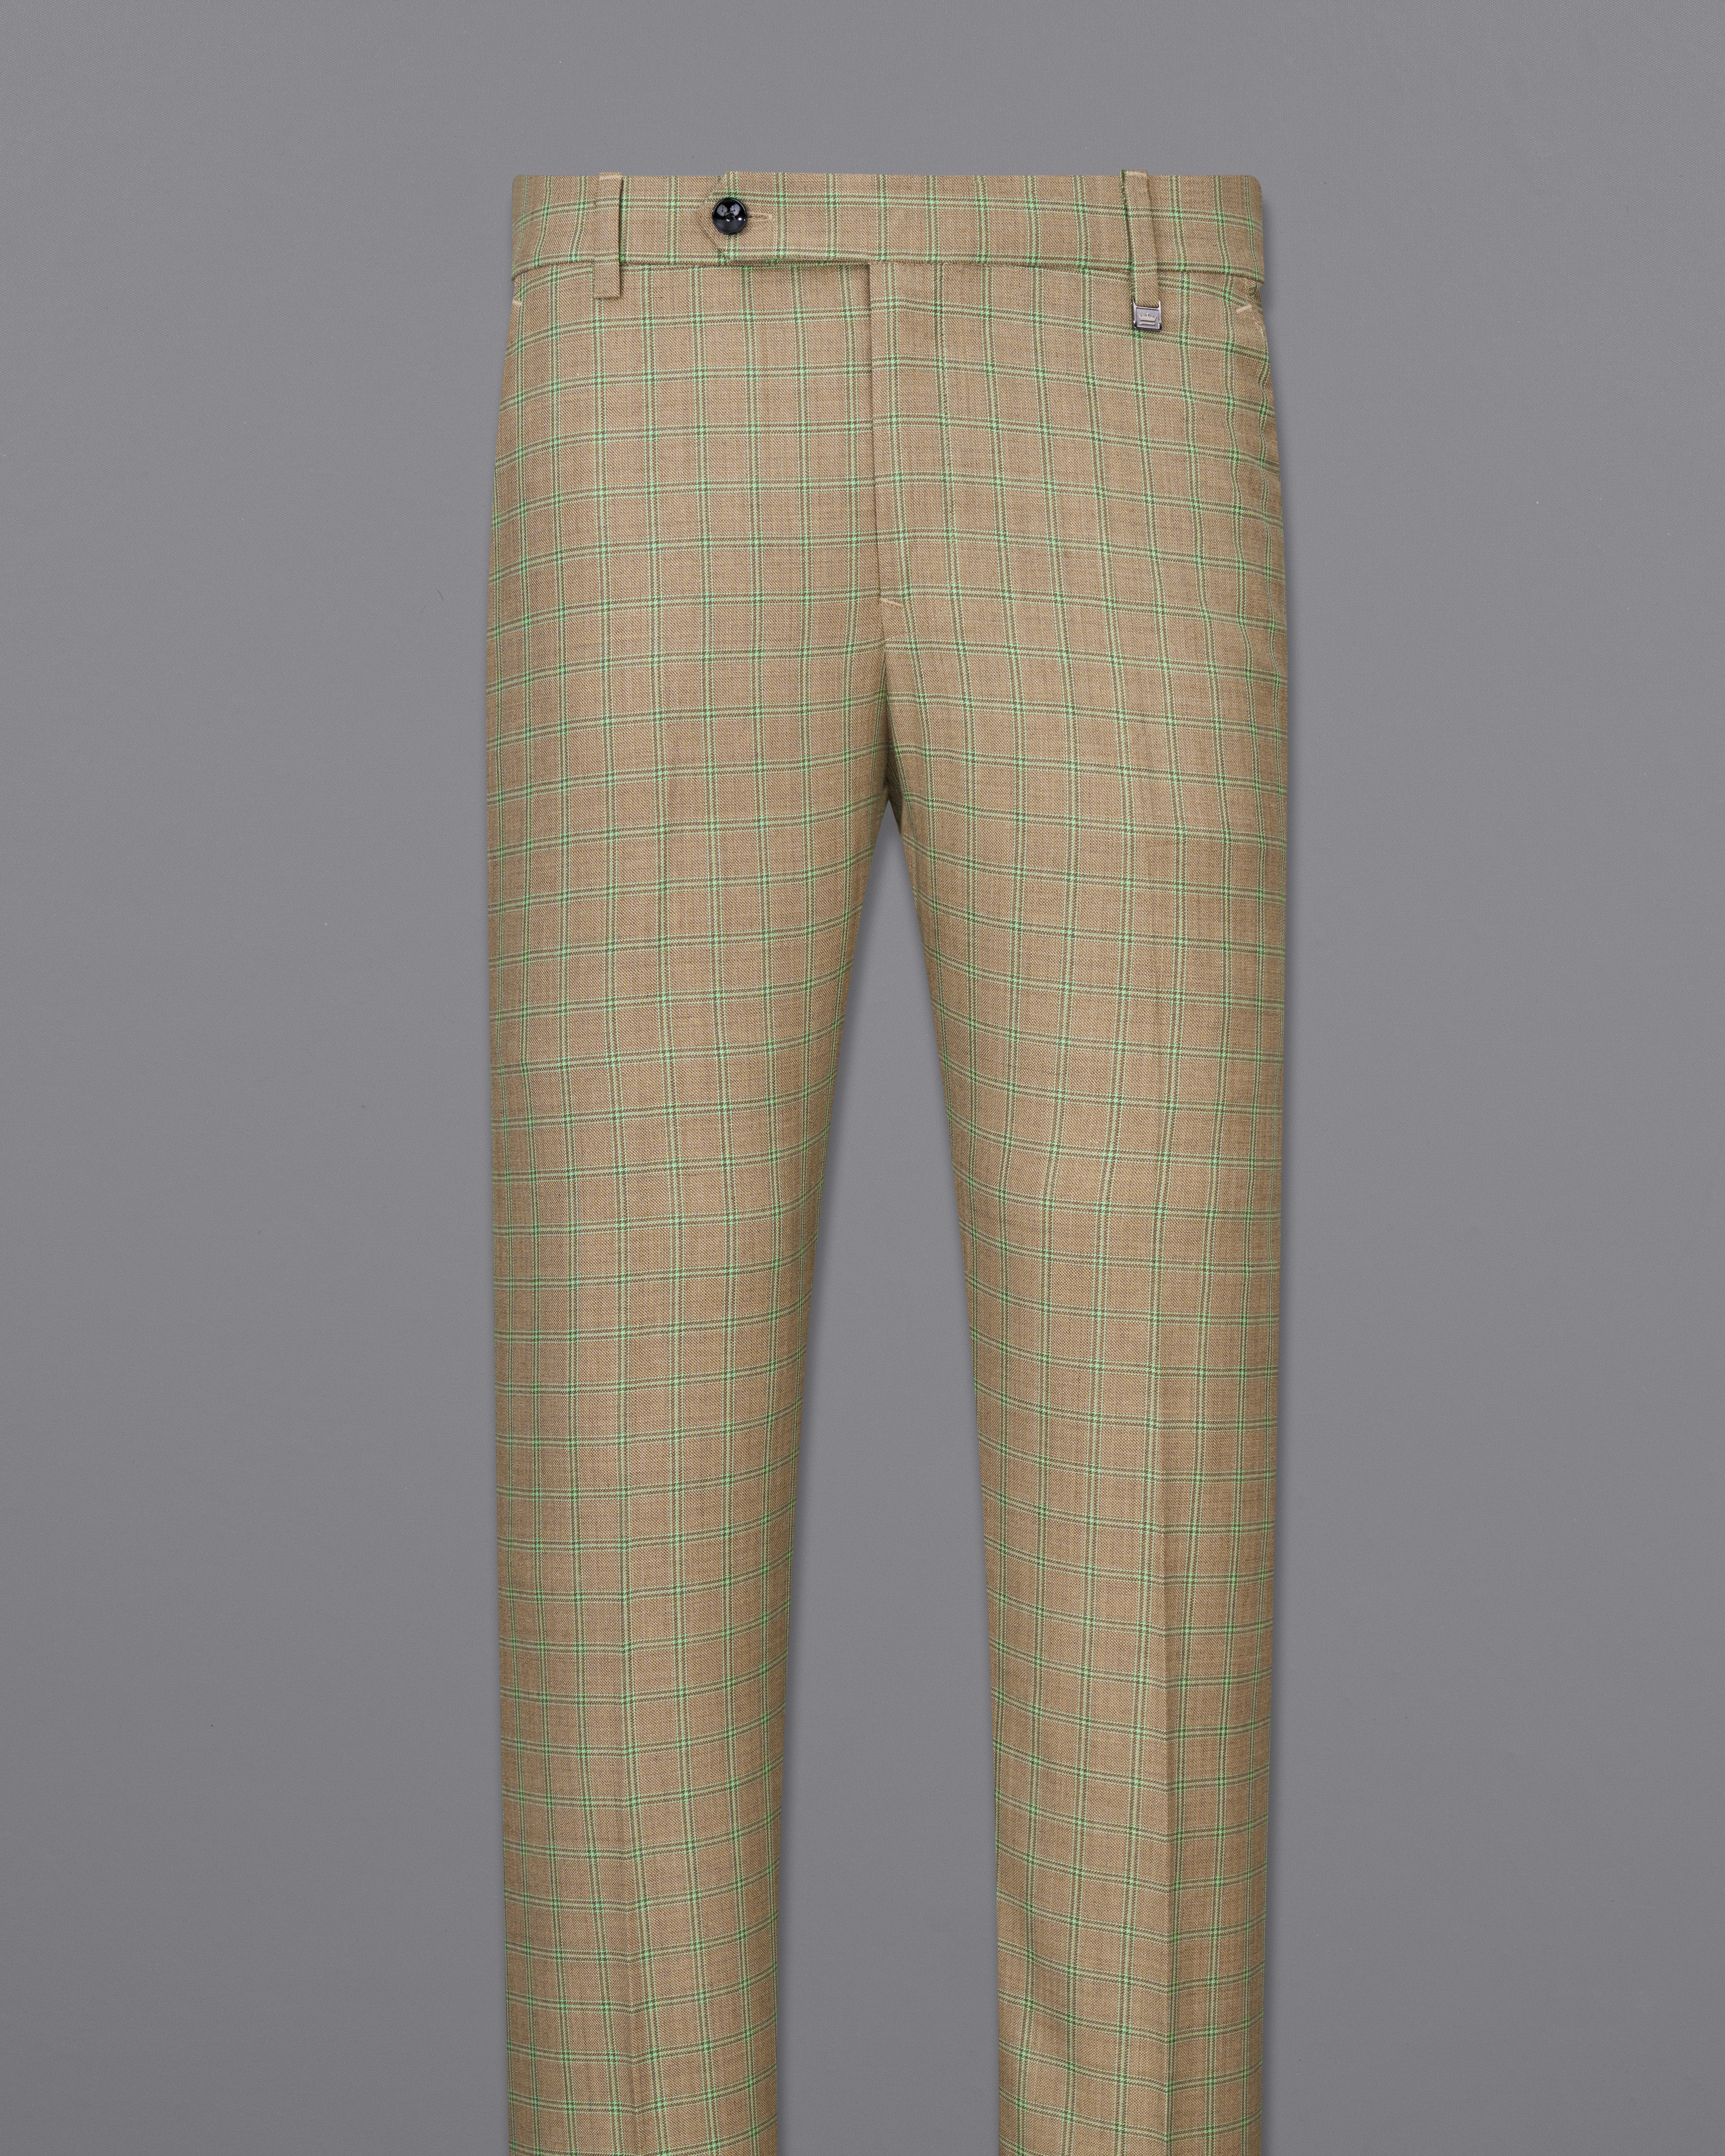 Sandrift Brown with Sprout Green Plaid Pants T2483-28, T2483-30, T2483-32, T2483-34, T2483-36, T2483-38, T2483-40, T2483-42, T2483-44